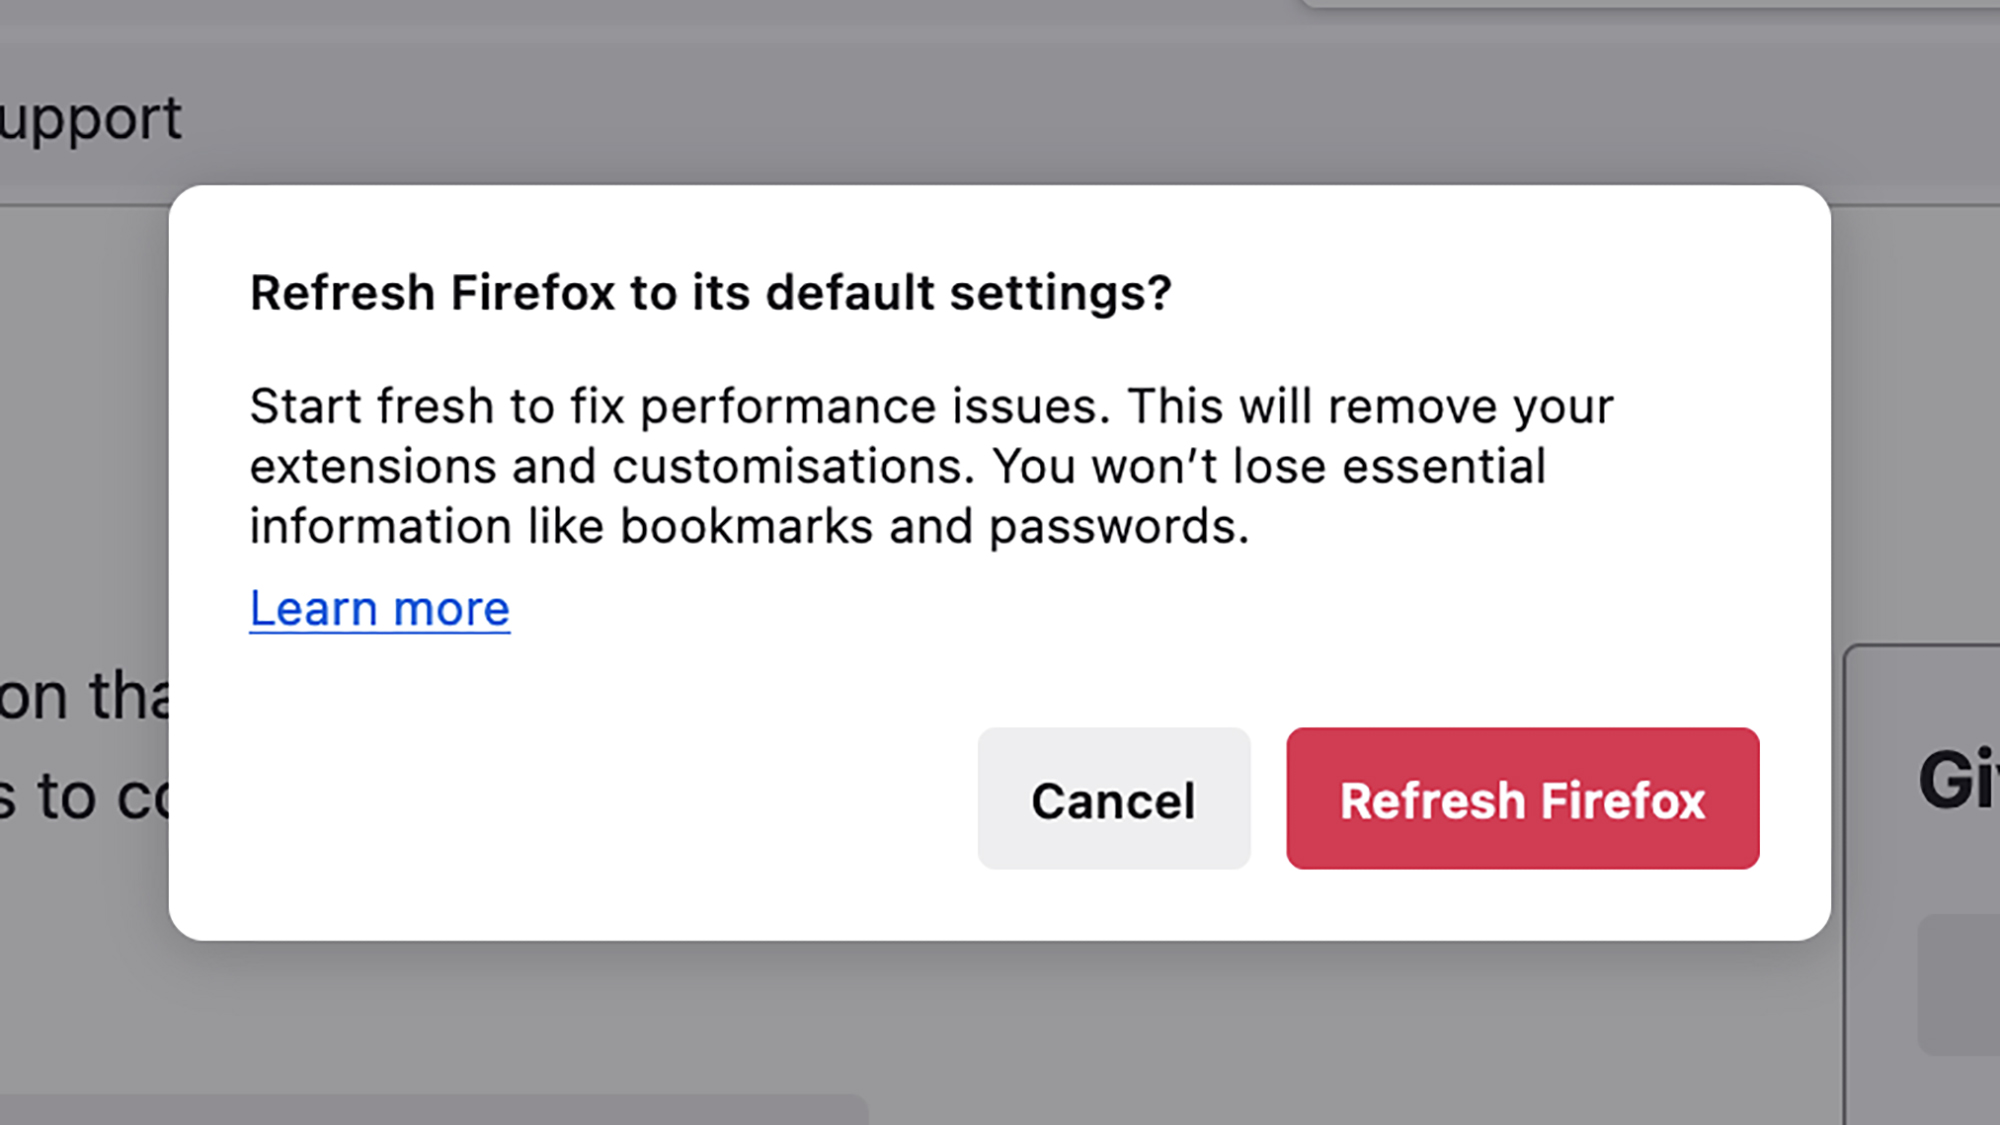 You can refresh Firefox without uninstalling it.